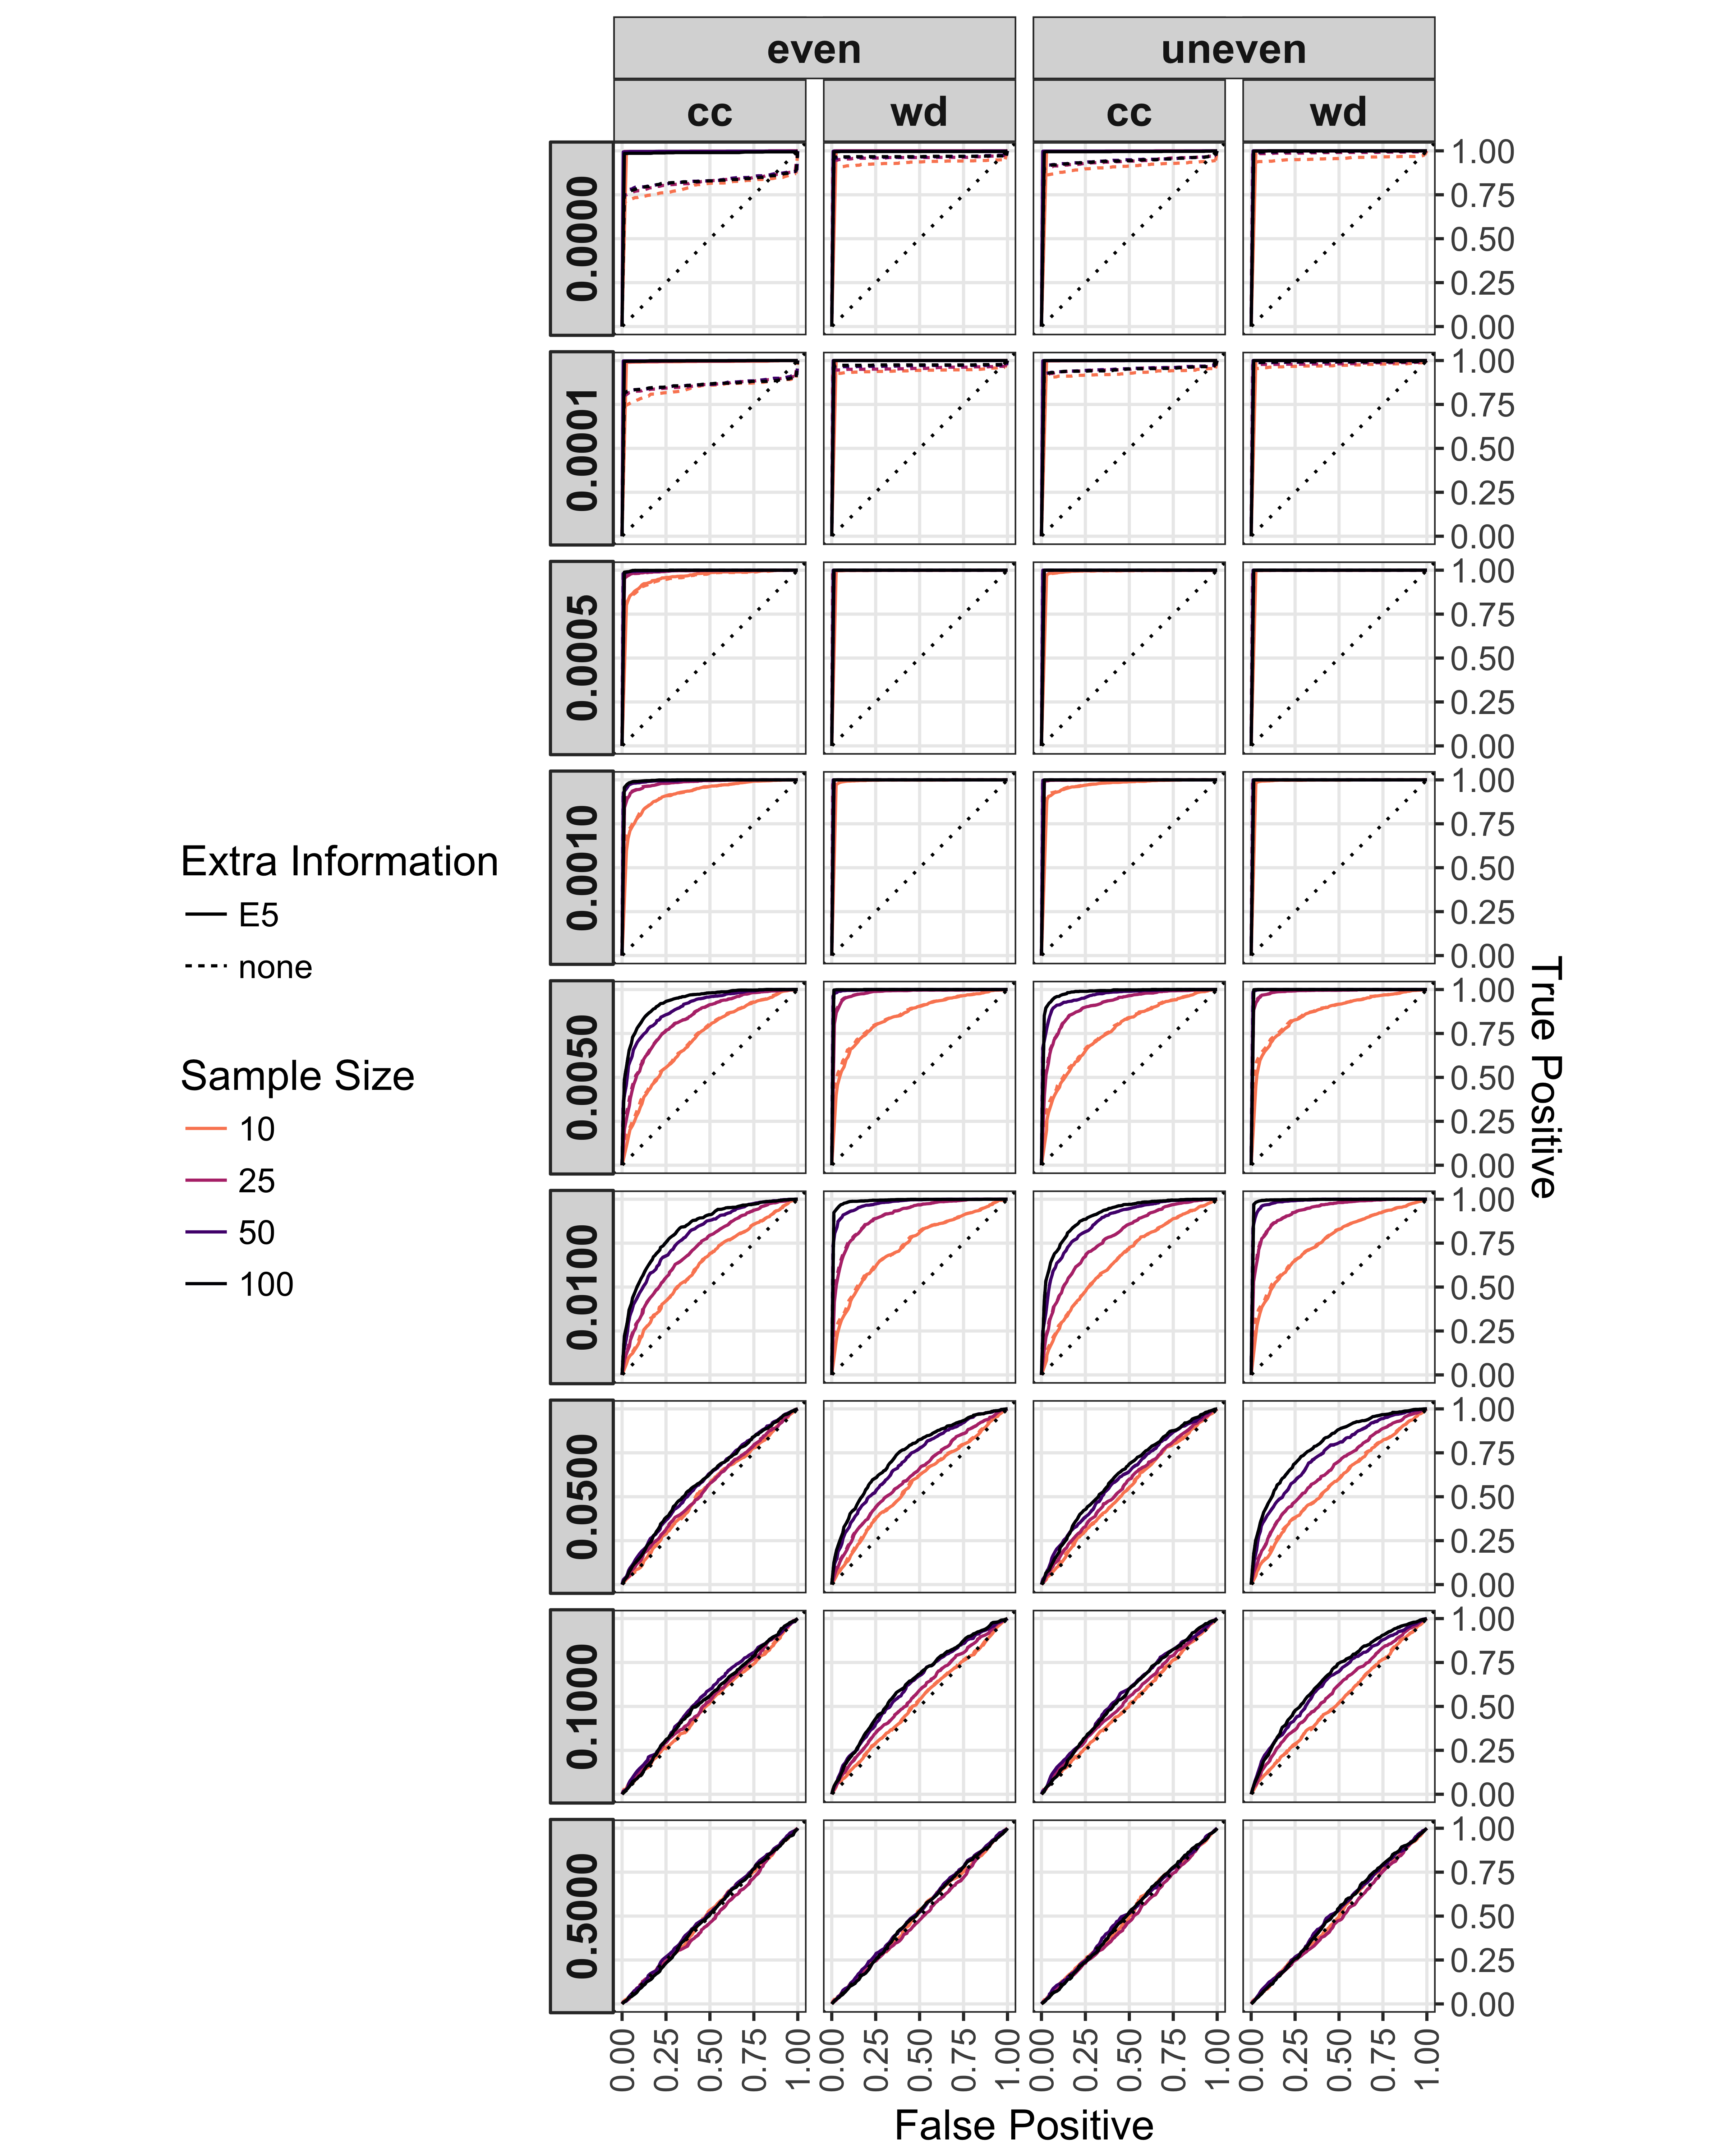 Effect of rate of sexual reproduction, sample size (n), mutation rate,
clone-correction, and $E_{5A}$ augmentation on ROC analysis of
$\bar{r}_d$. Rate of sexual reproduction arranged in rows. Clone
corrected (cc) and whole (wd) data sets with even and uneven mutation
rates arranged in columns. Line type indicates the use of $E_{5A}$ &gt;
0.85 to augment the analysis. Line shade indicates sample size. A dotted
line of unity is shown in each plot. Each ROC curve is calculated over
100 values of $\alpha$ from 0 to 1.